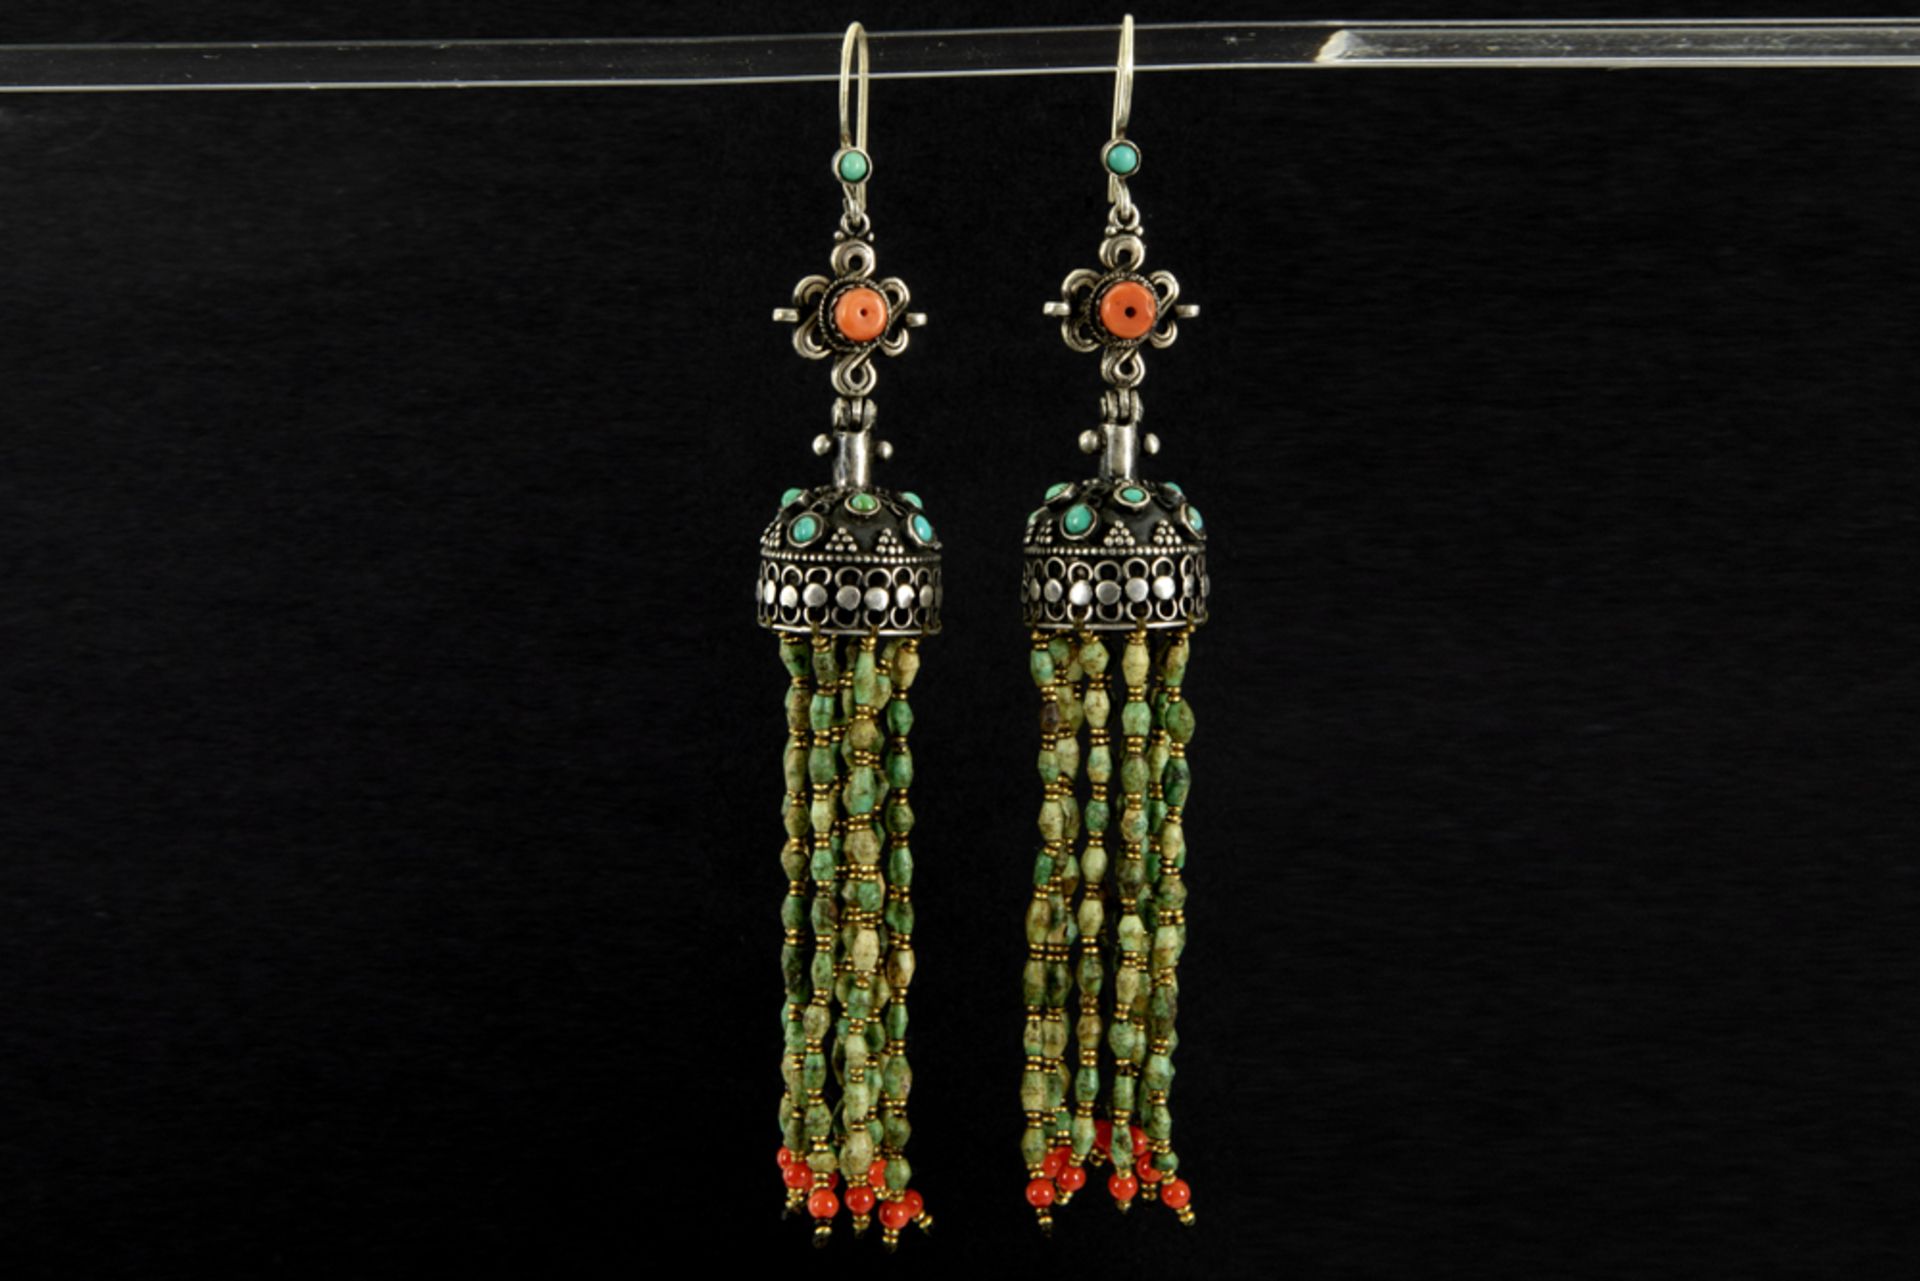 pair of antique Himalayan earrings in silver with coral and turquois and with tassels in